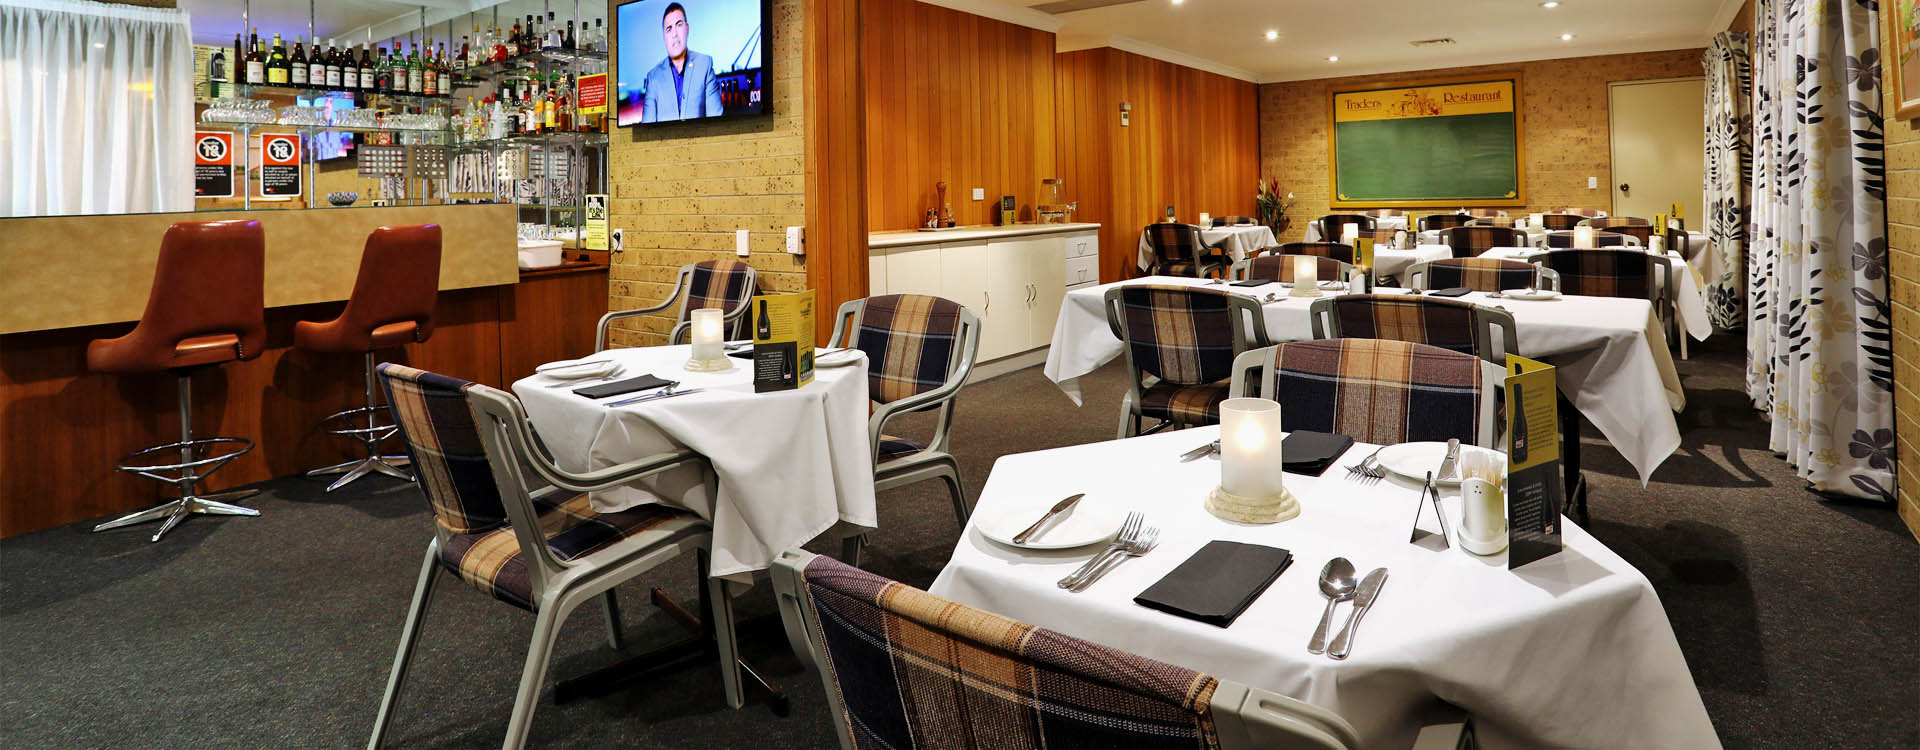 Guests are invited to dine at the very popular Traders Restaurant, which is licensed and on premises.